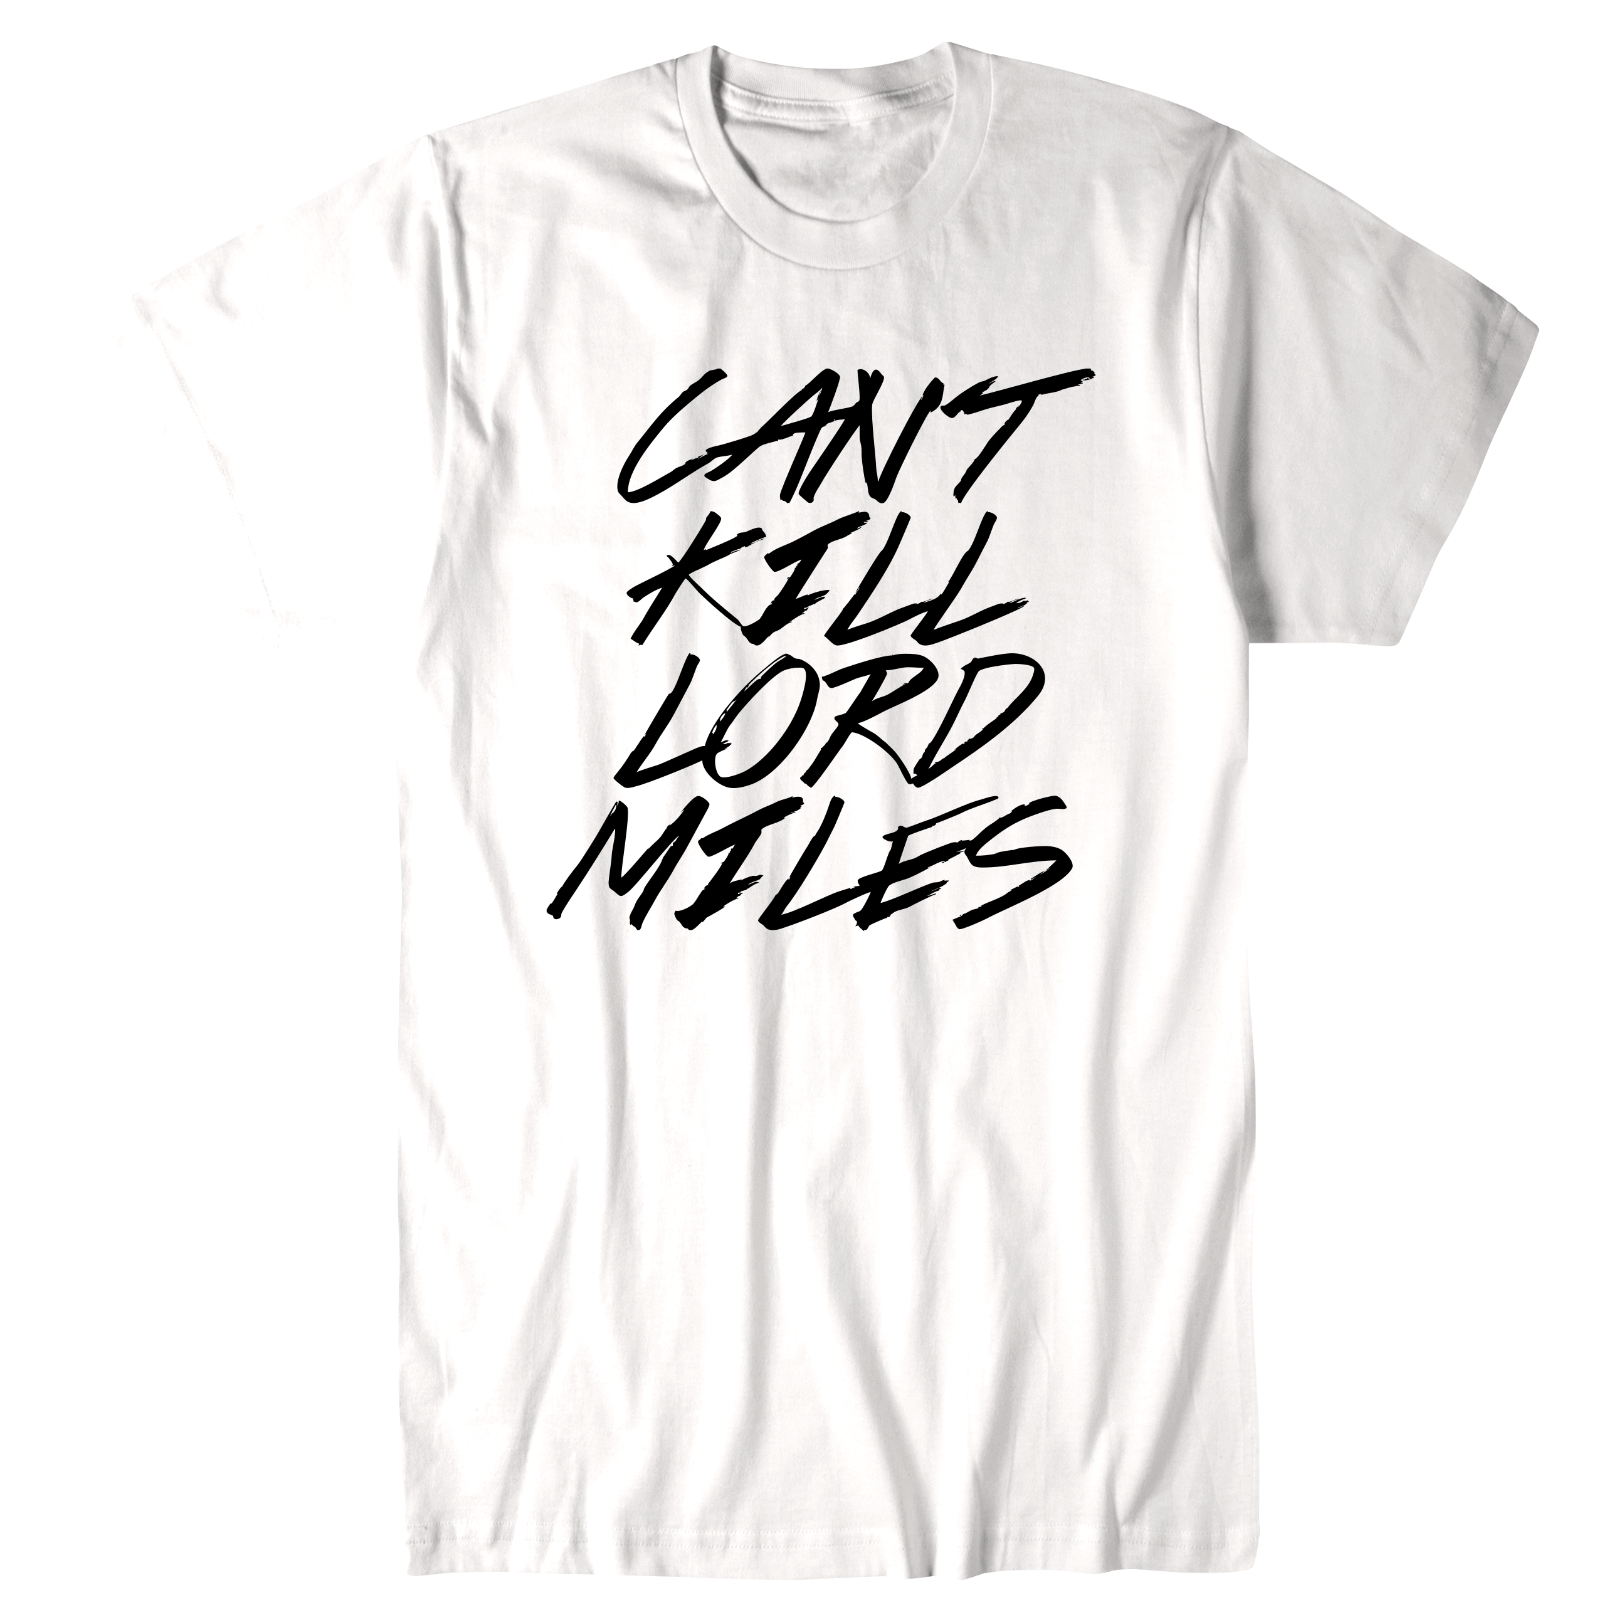 Cant Kill Lord Miles (White) Tanktop-3